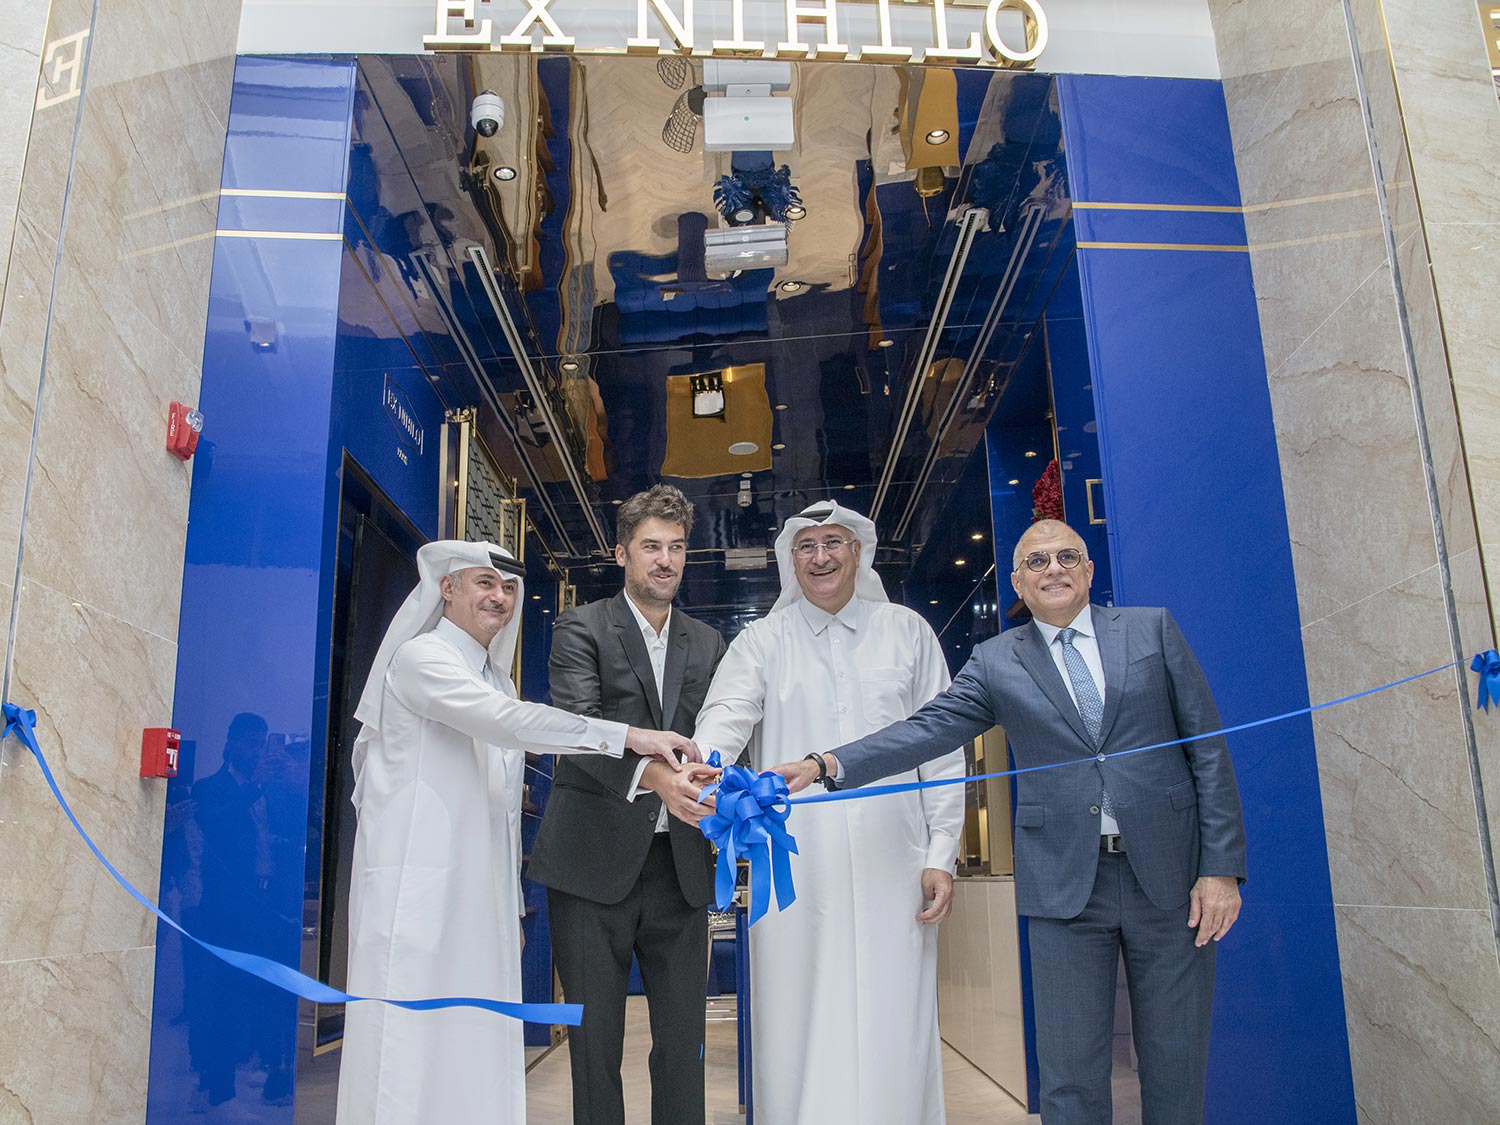 EX NIHILO Opens its First Flagship Store in Qatar